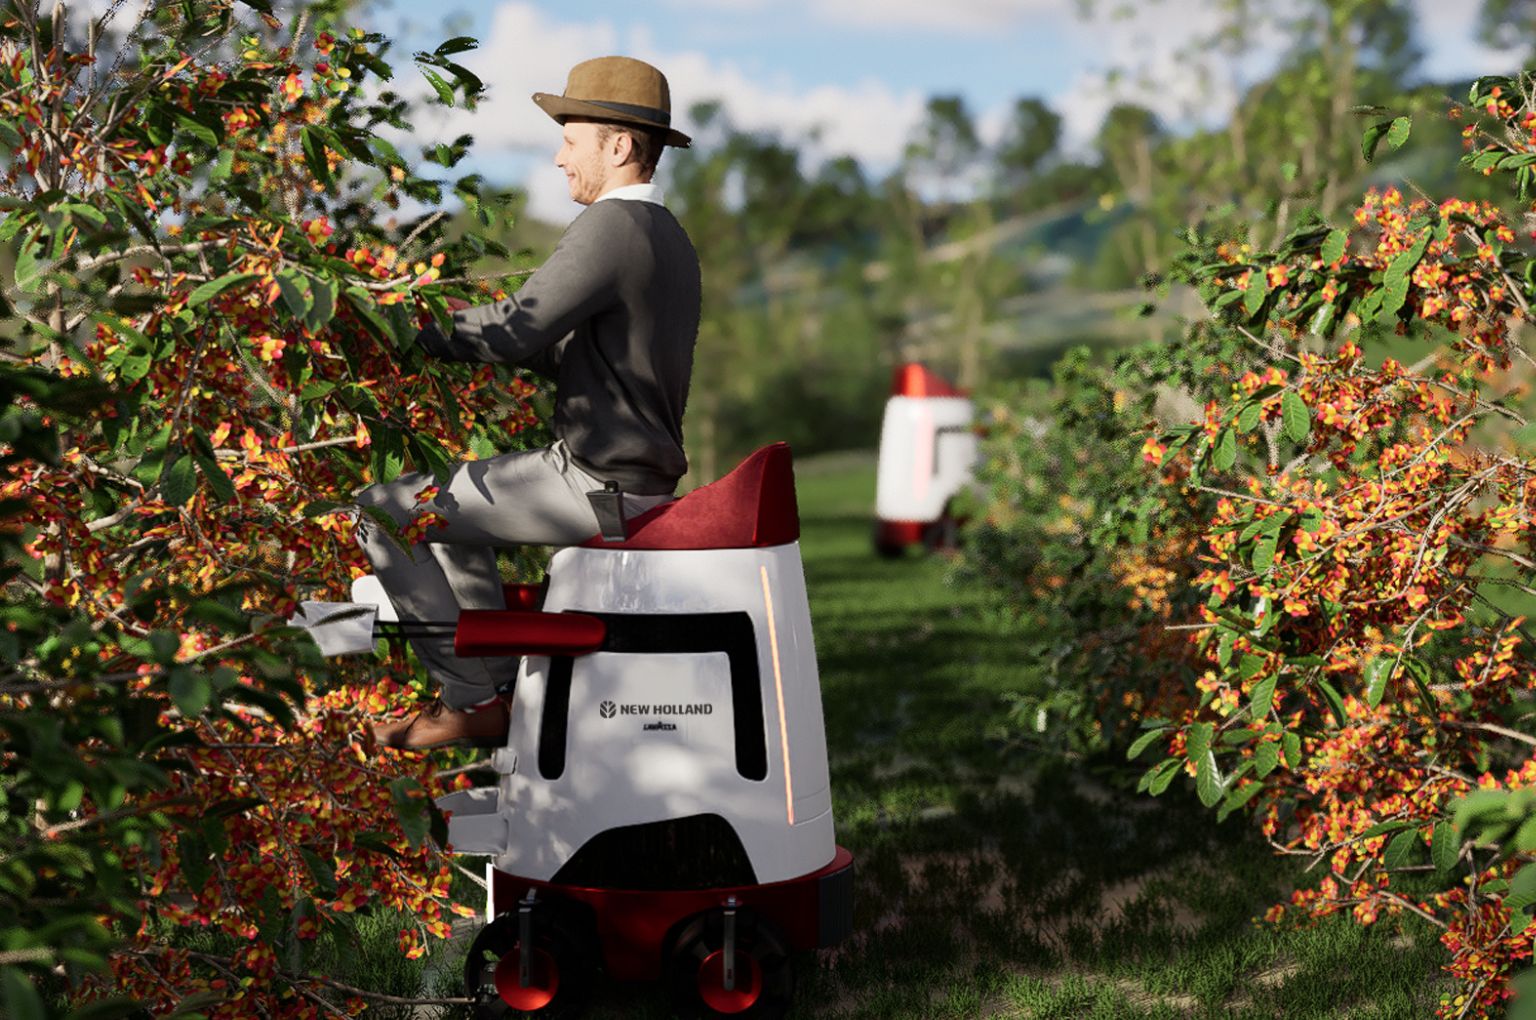 Coffee harvesters of the future